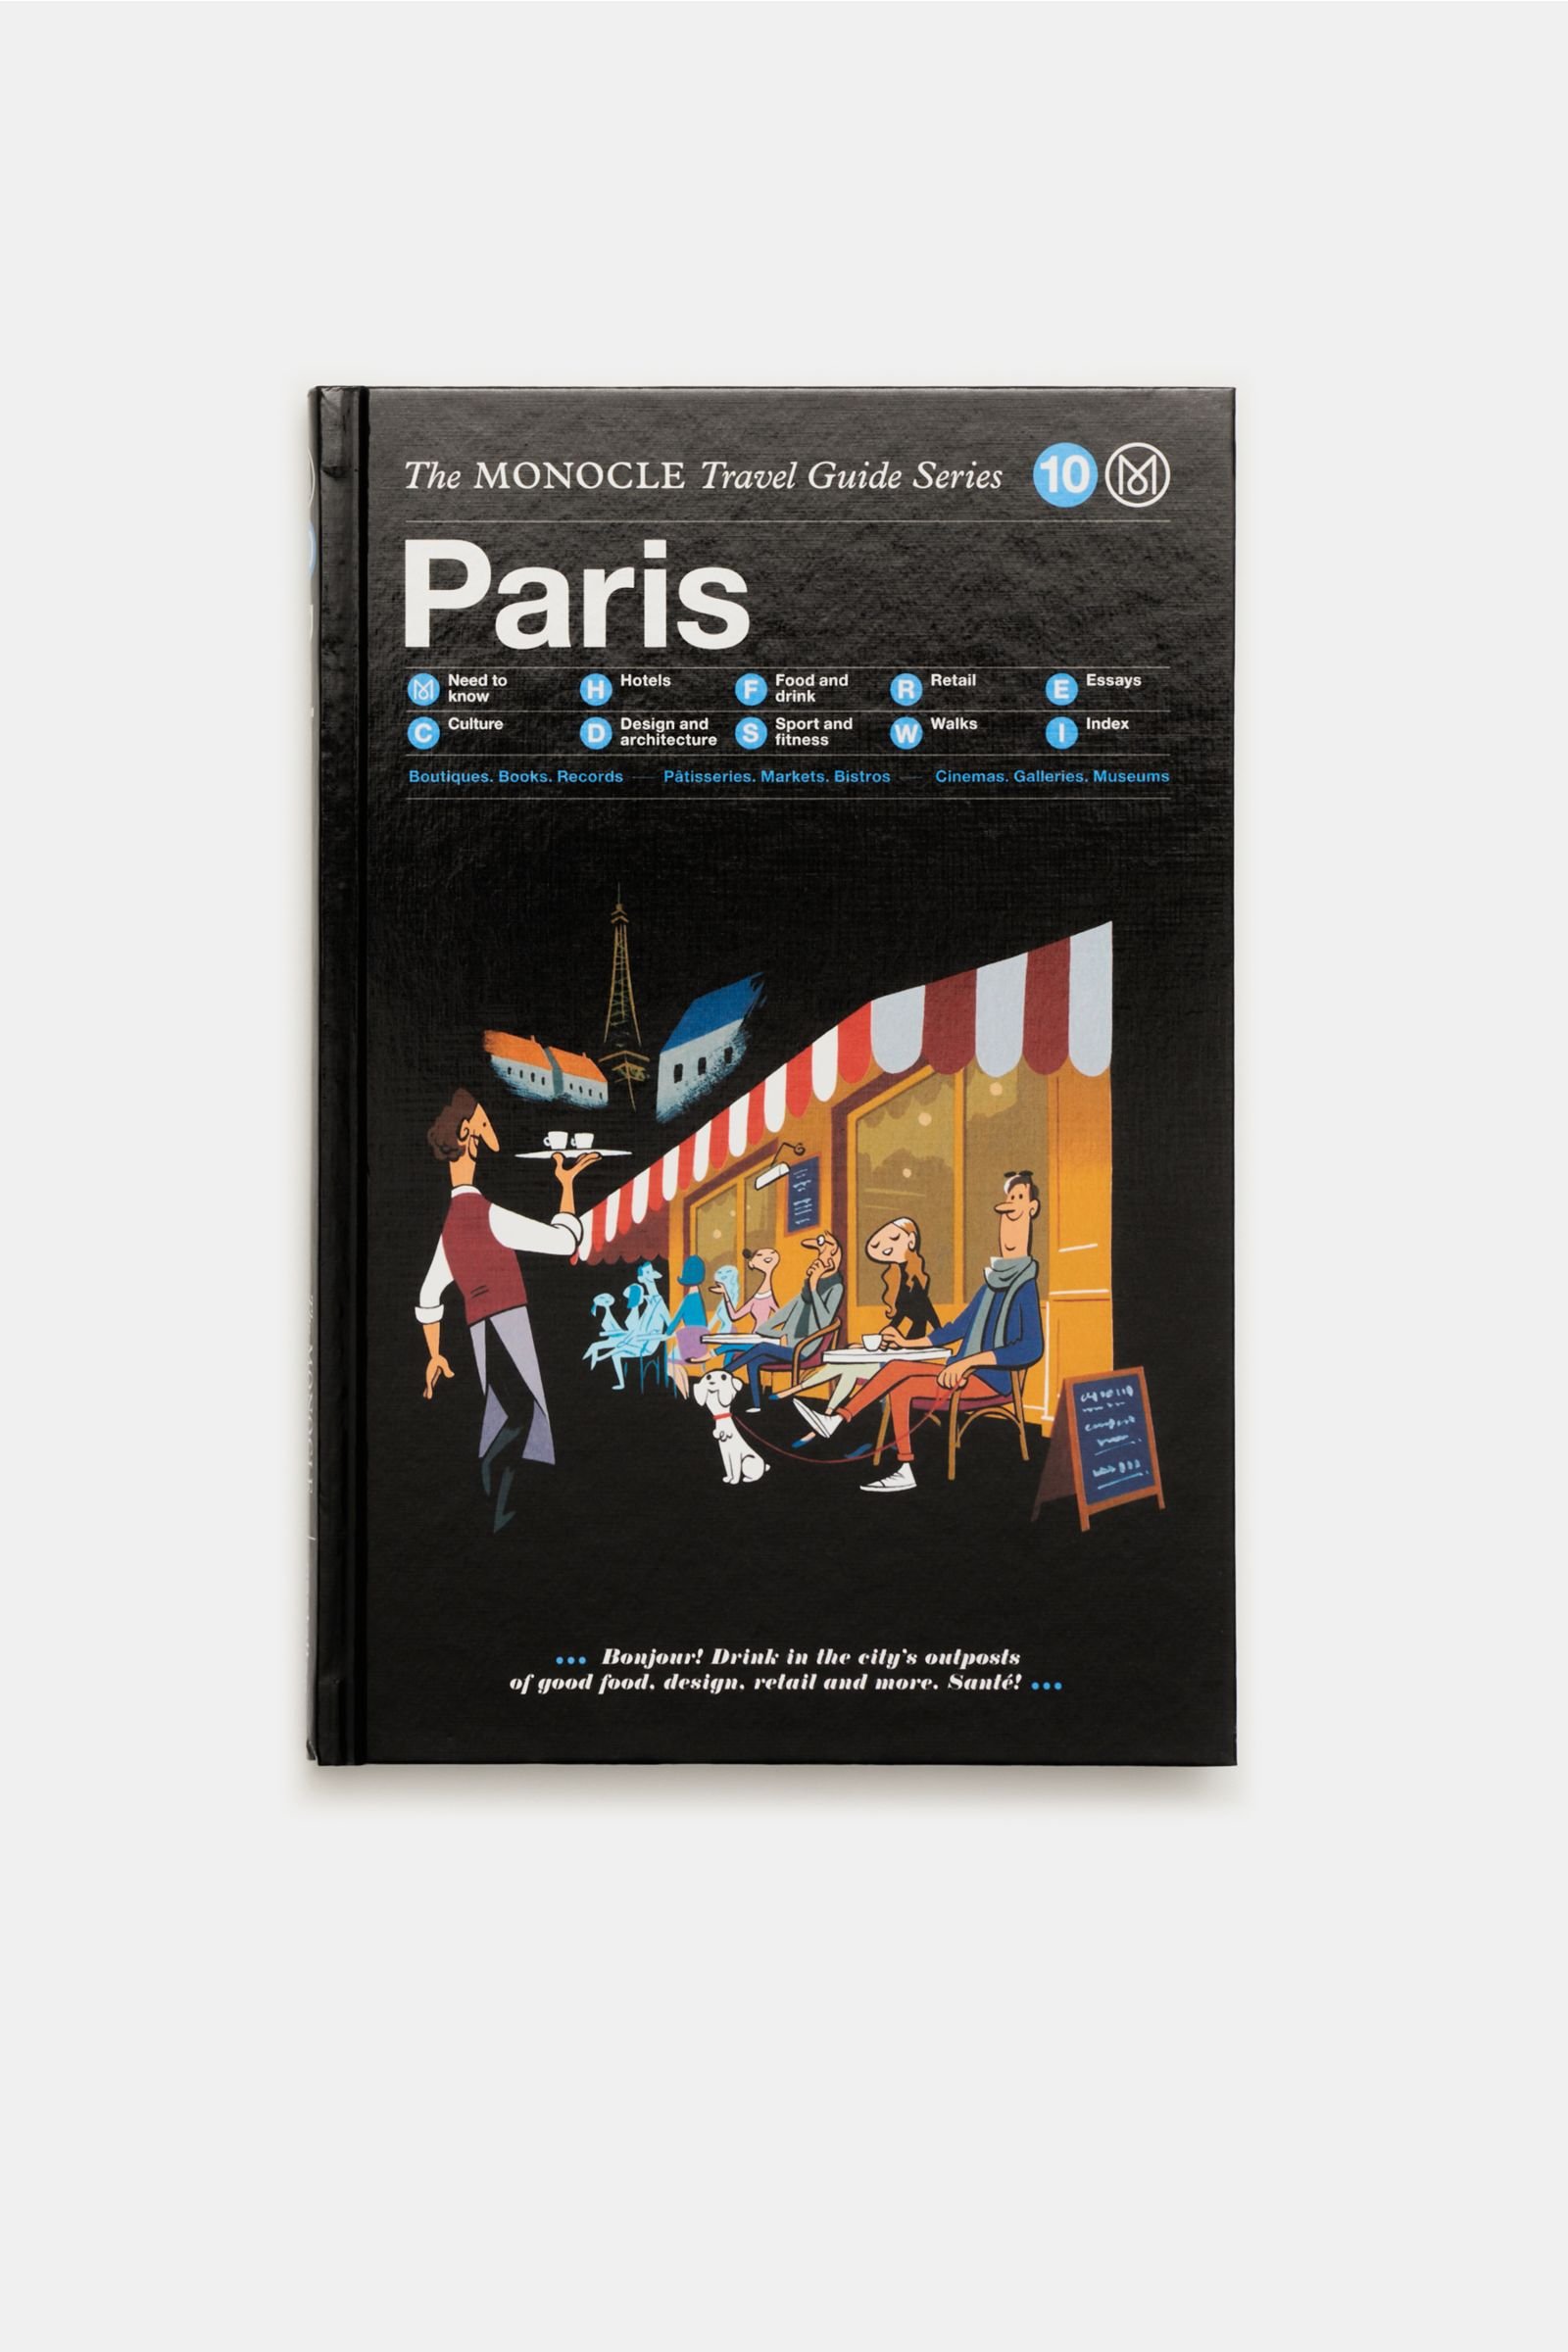 Travel guide 'Paris' – The Monocle Travel Guide Series